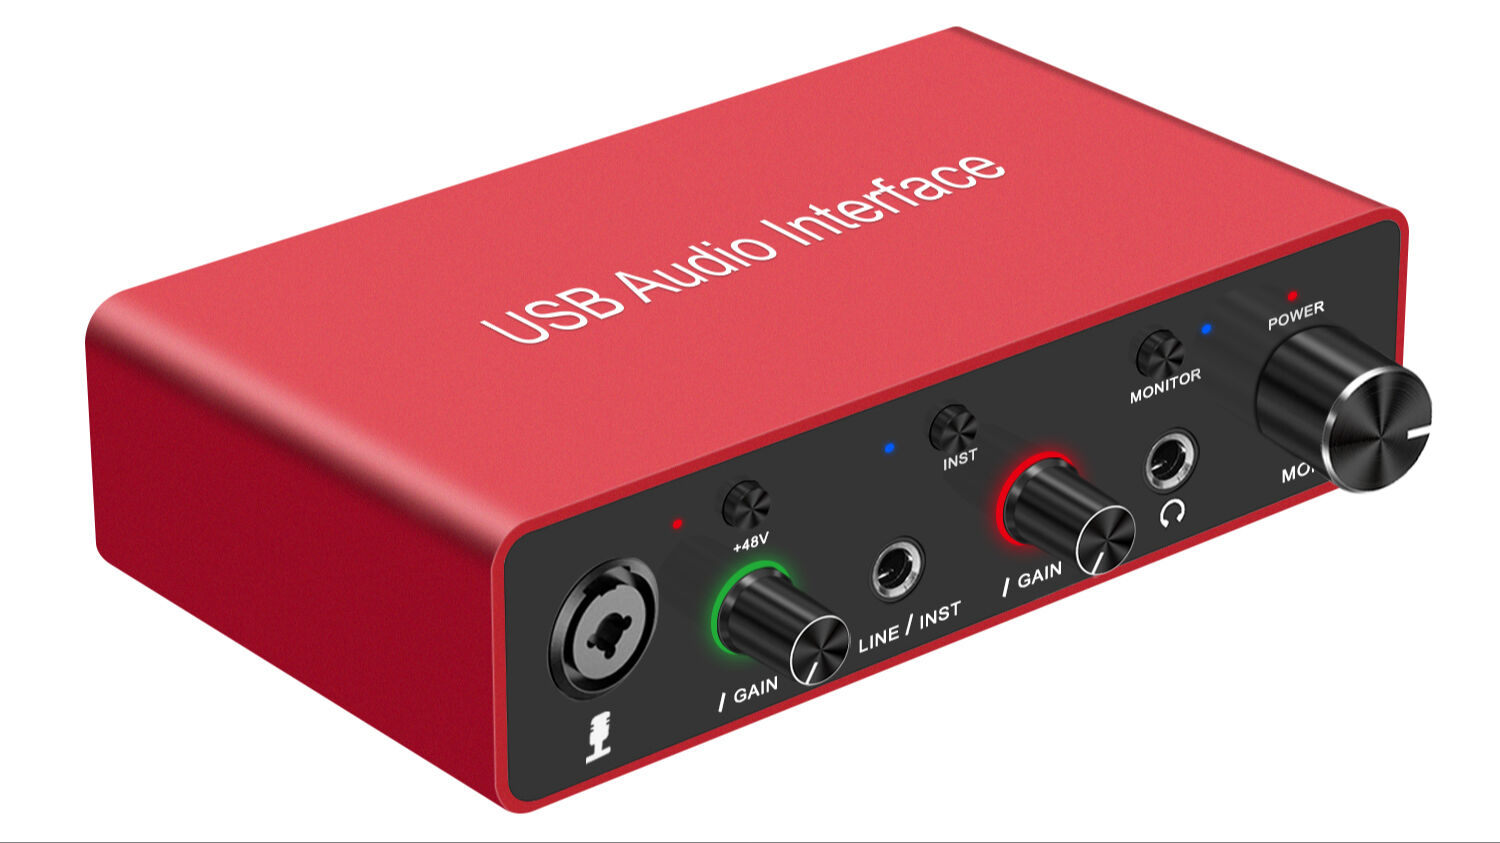 USB Audio Interface +48V Phantom Power 24Bit/192kHz for Recording  Podcasting and Streaming Ultra-low Latency Plug and Play Noise-Free XLR  Audio